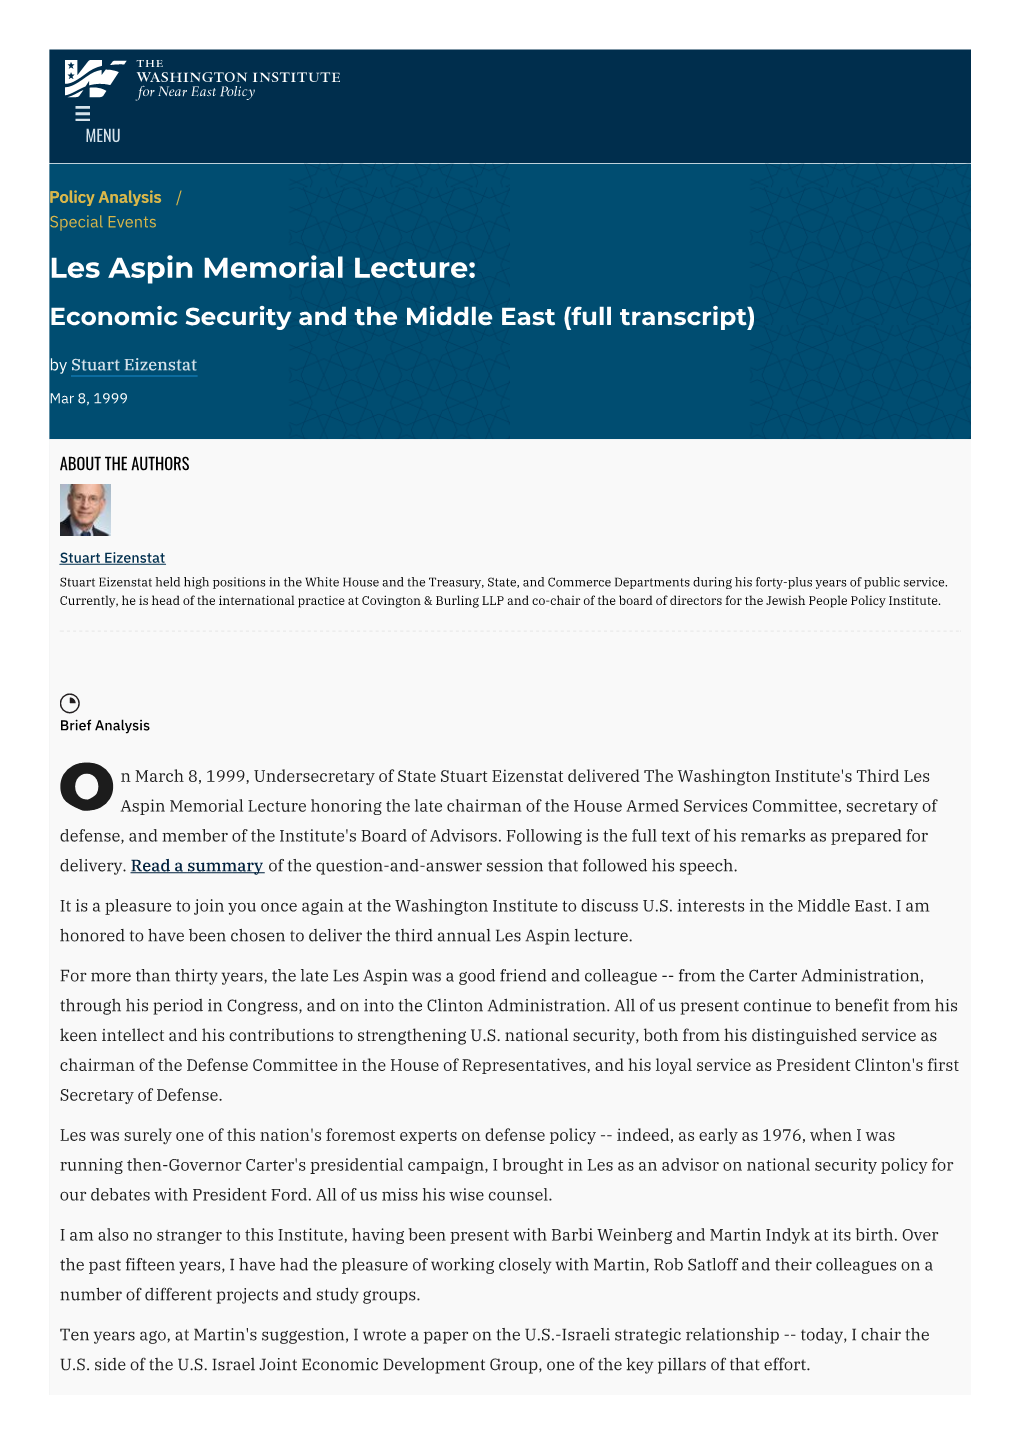 Les Aspin Memorial Lecture: Economic Security and the Middle East (Full Transcript) by Stuart Eizenstat